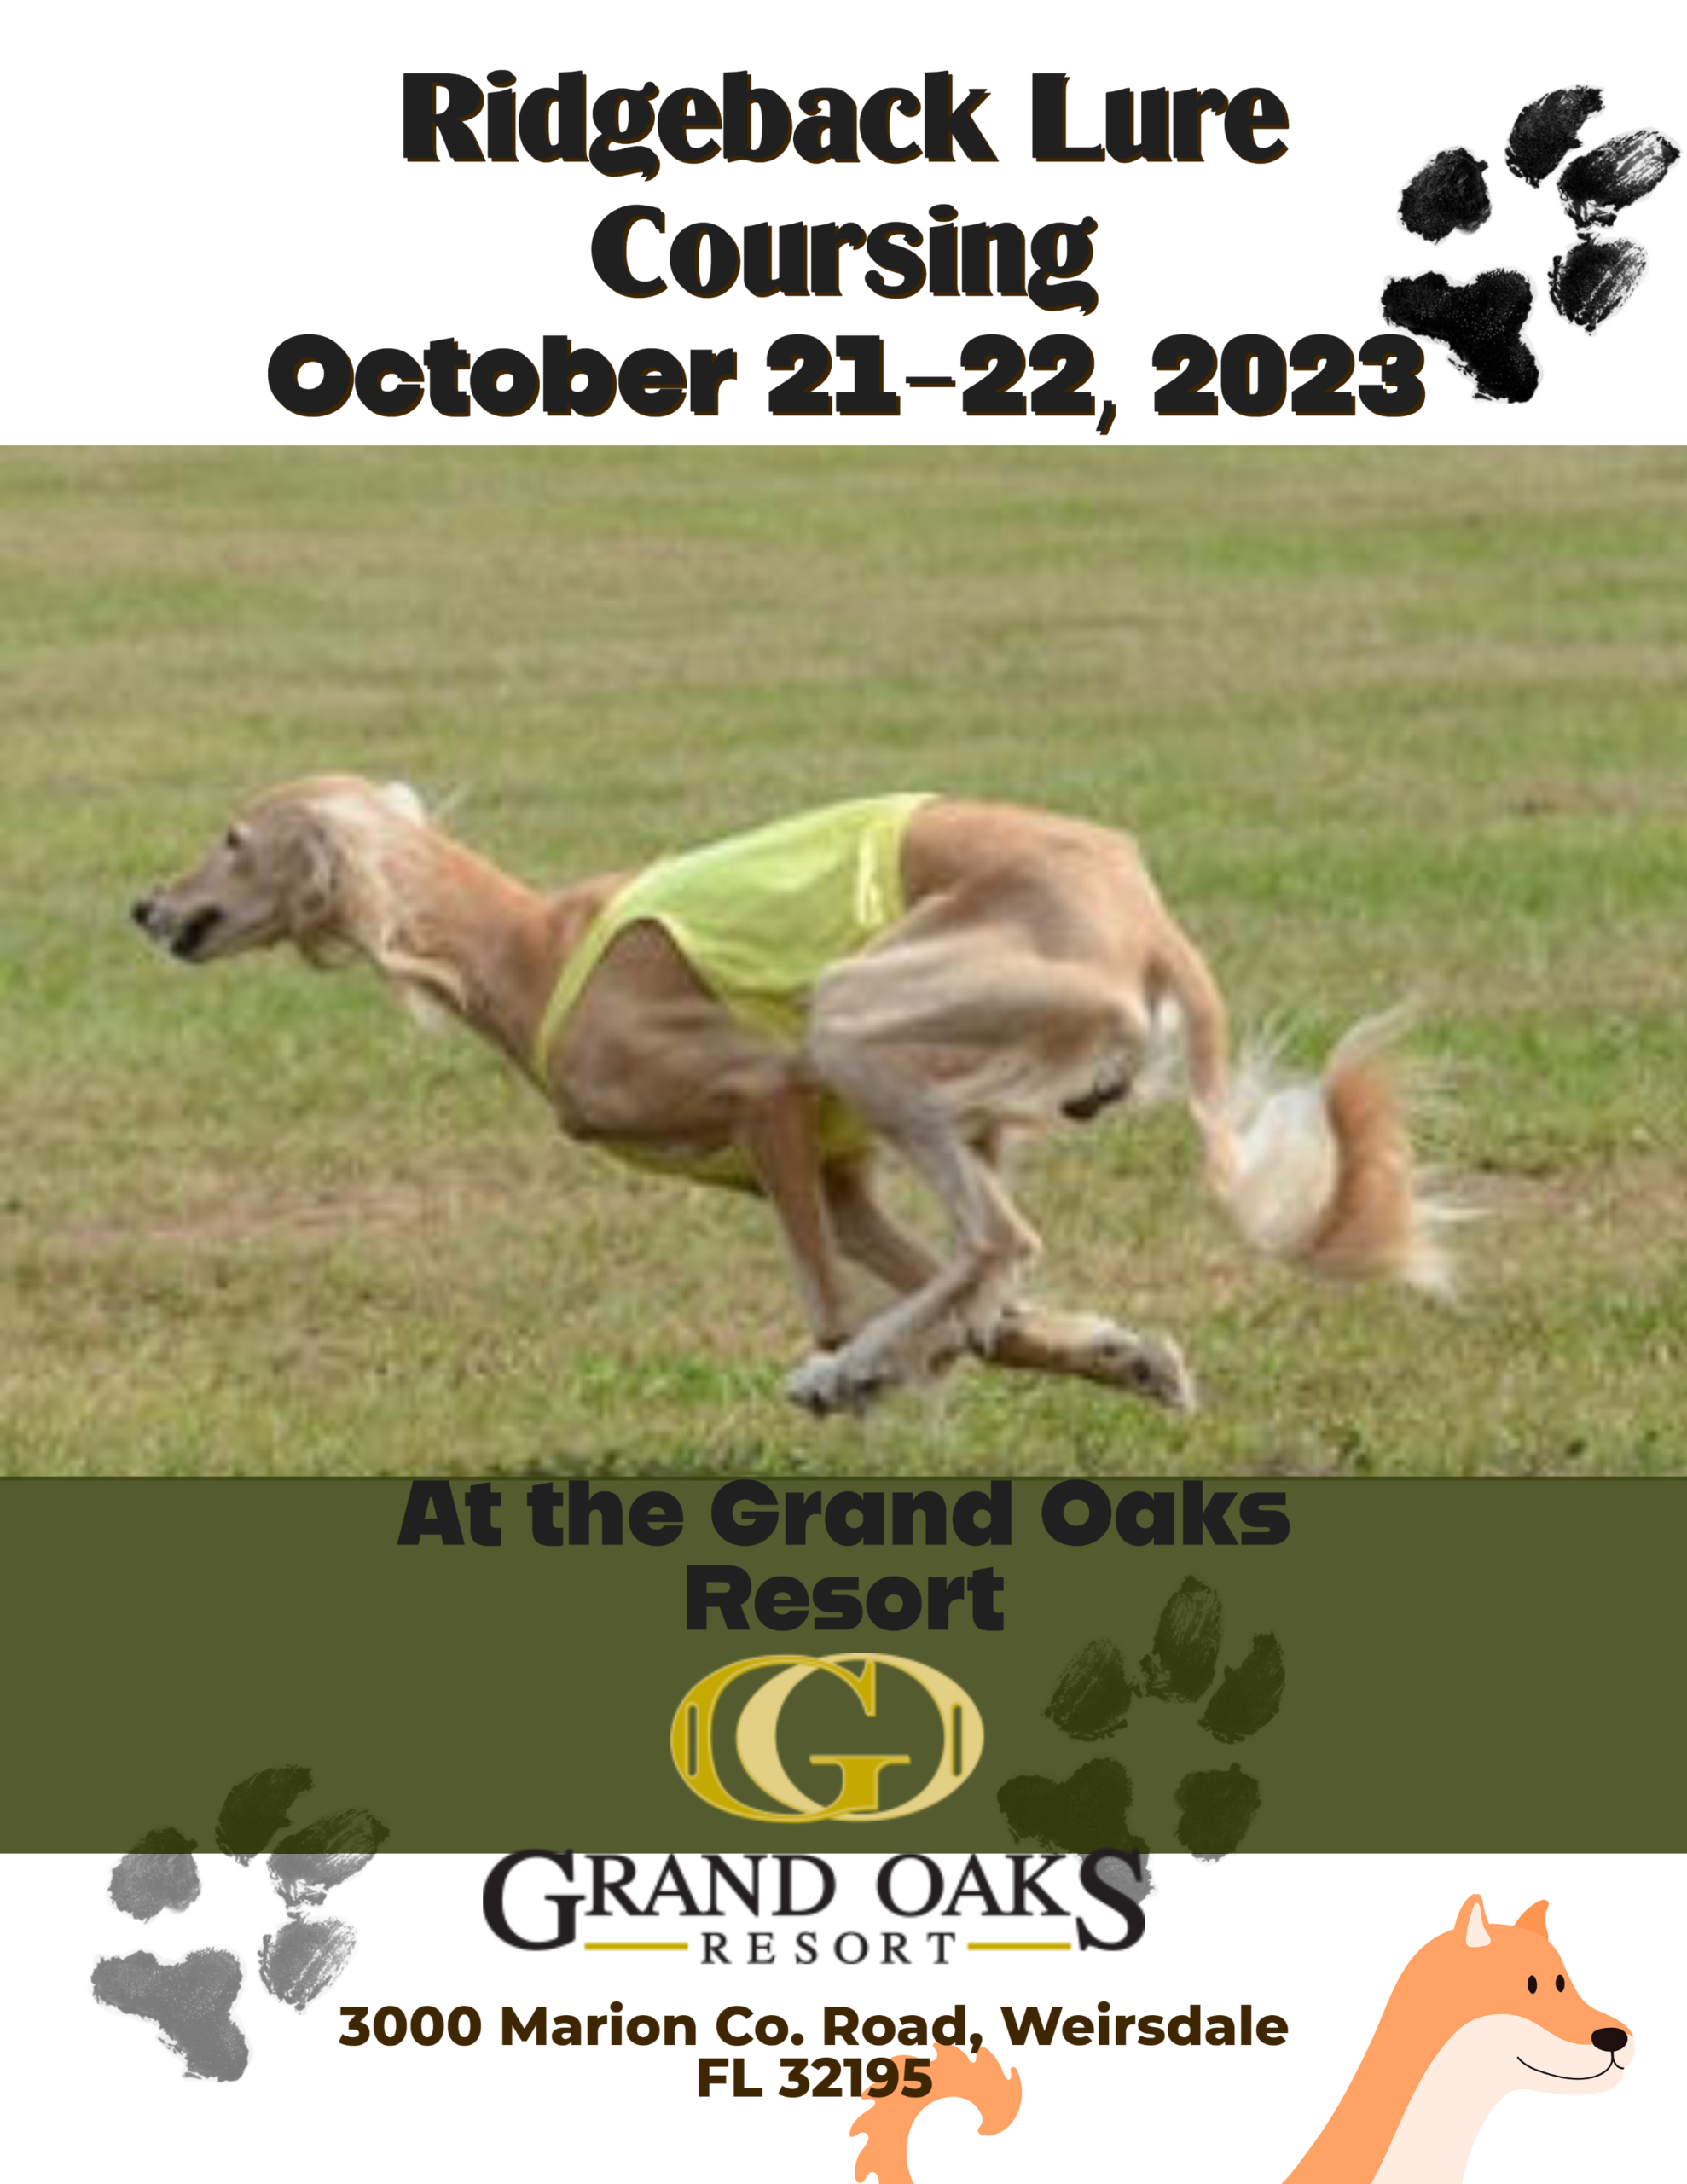 Dog show in Weirsdale, Florida